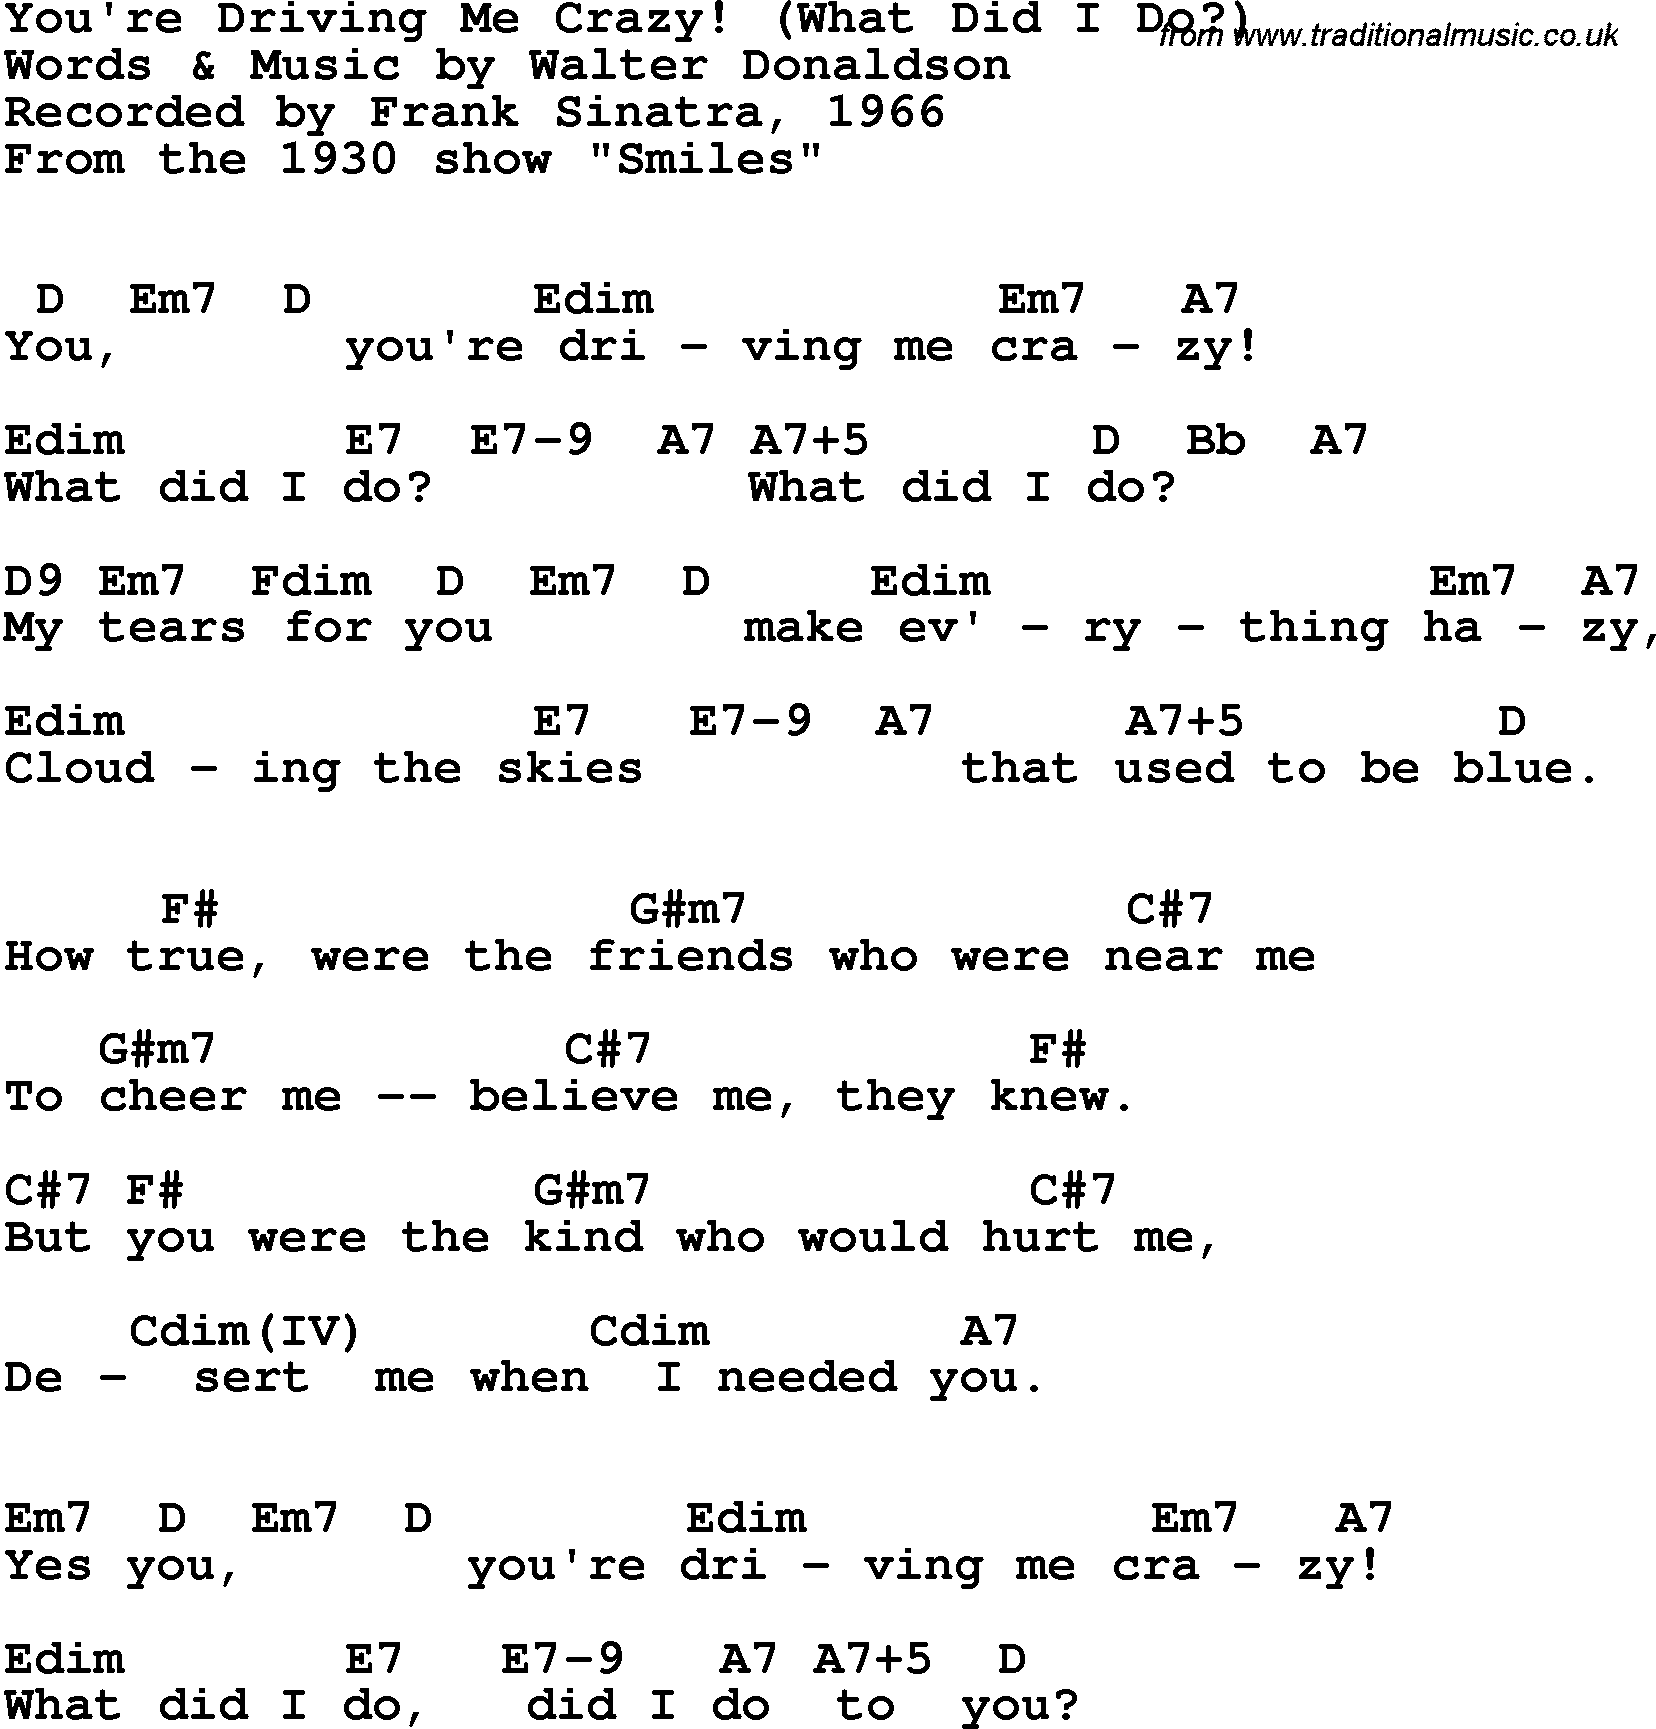 Song Lyrics With Guitar Chords For You Re Driving Me Crazy Frank Sinatra 1966 Her friend and collaborator patrick leonard has said. traditional music library